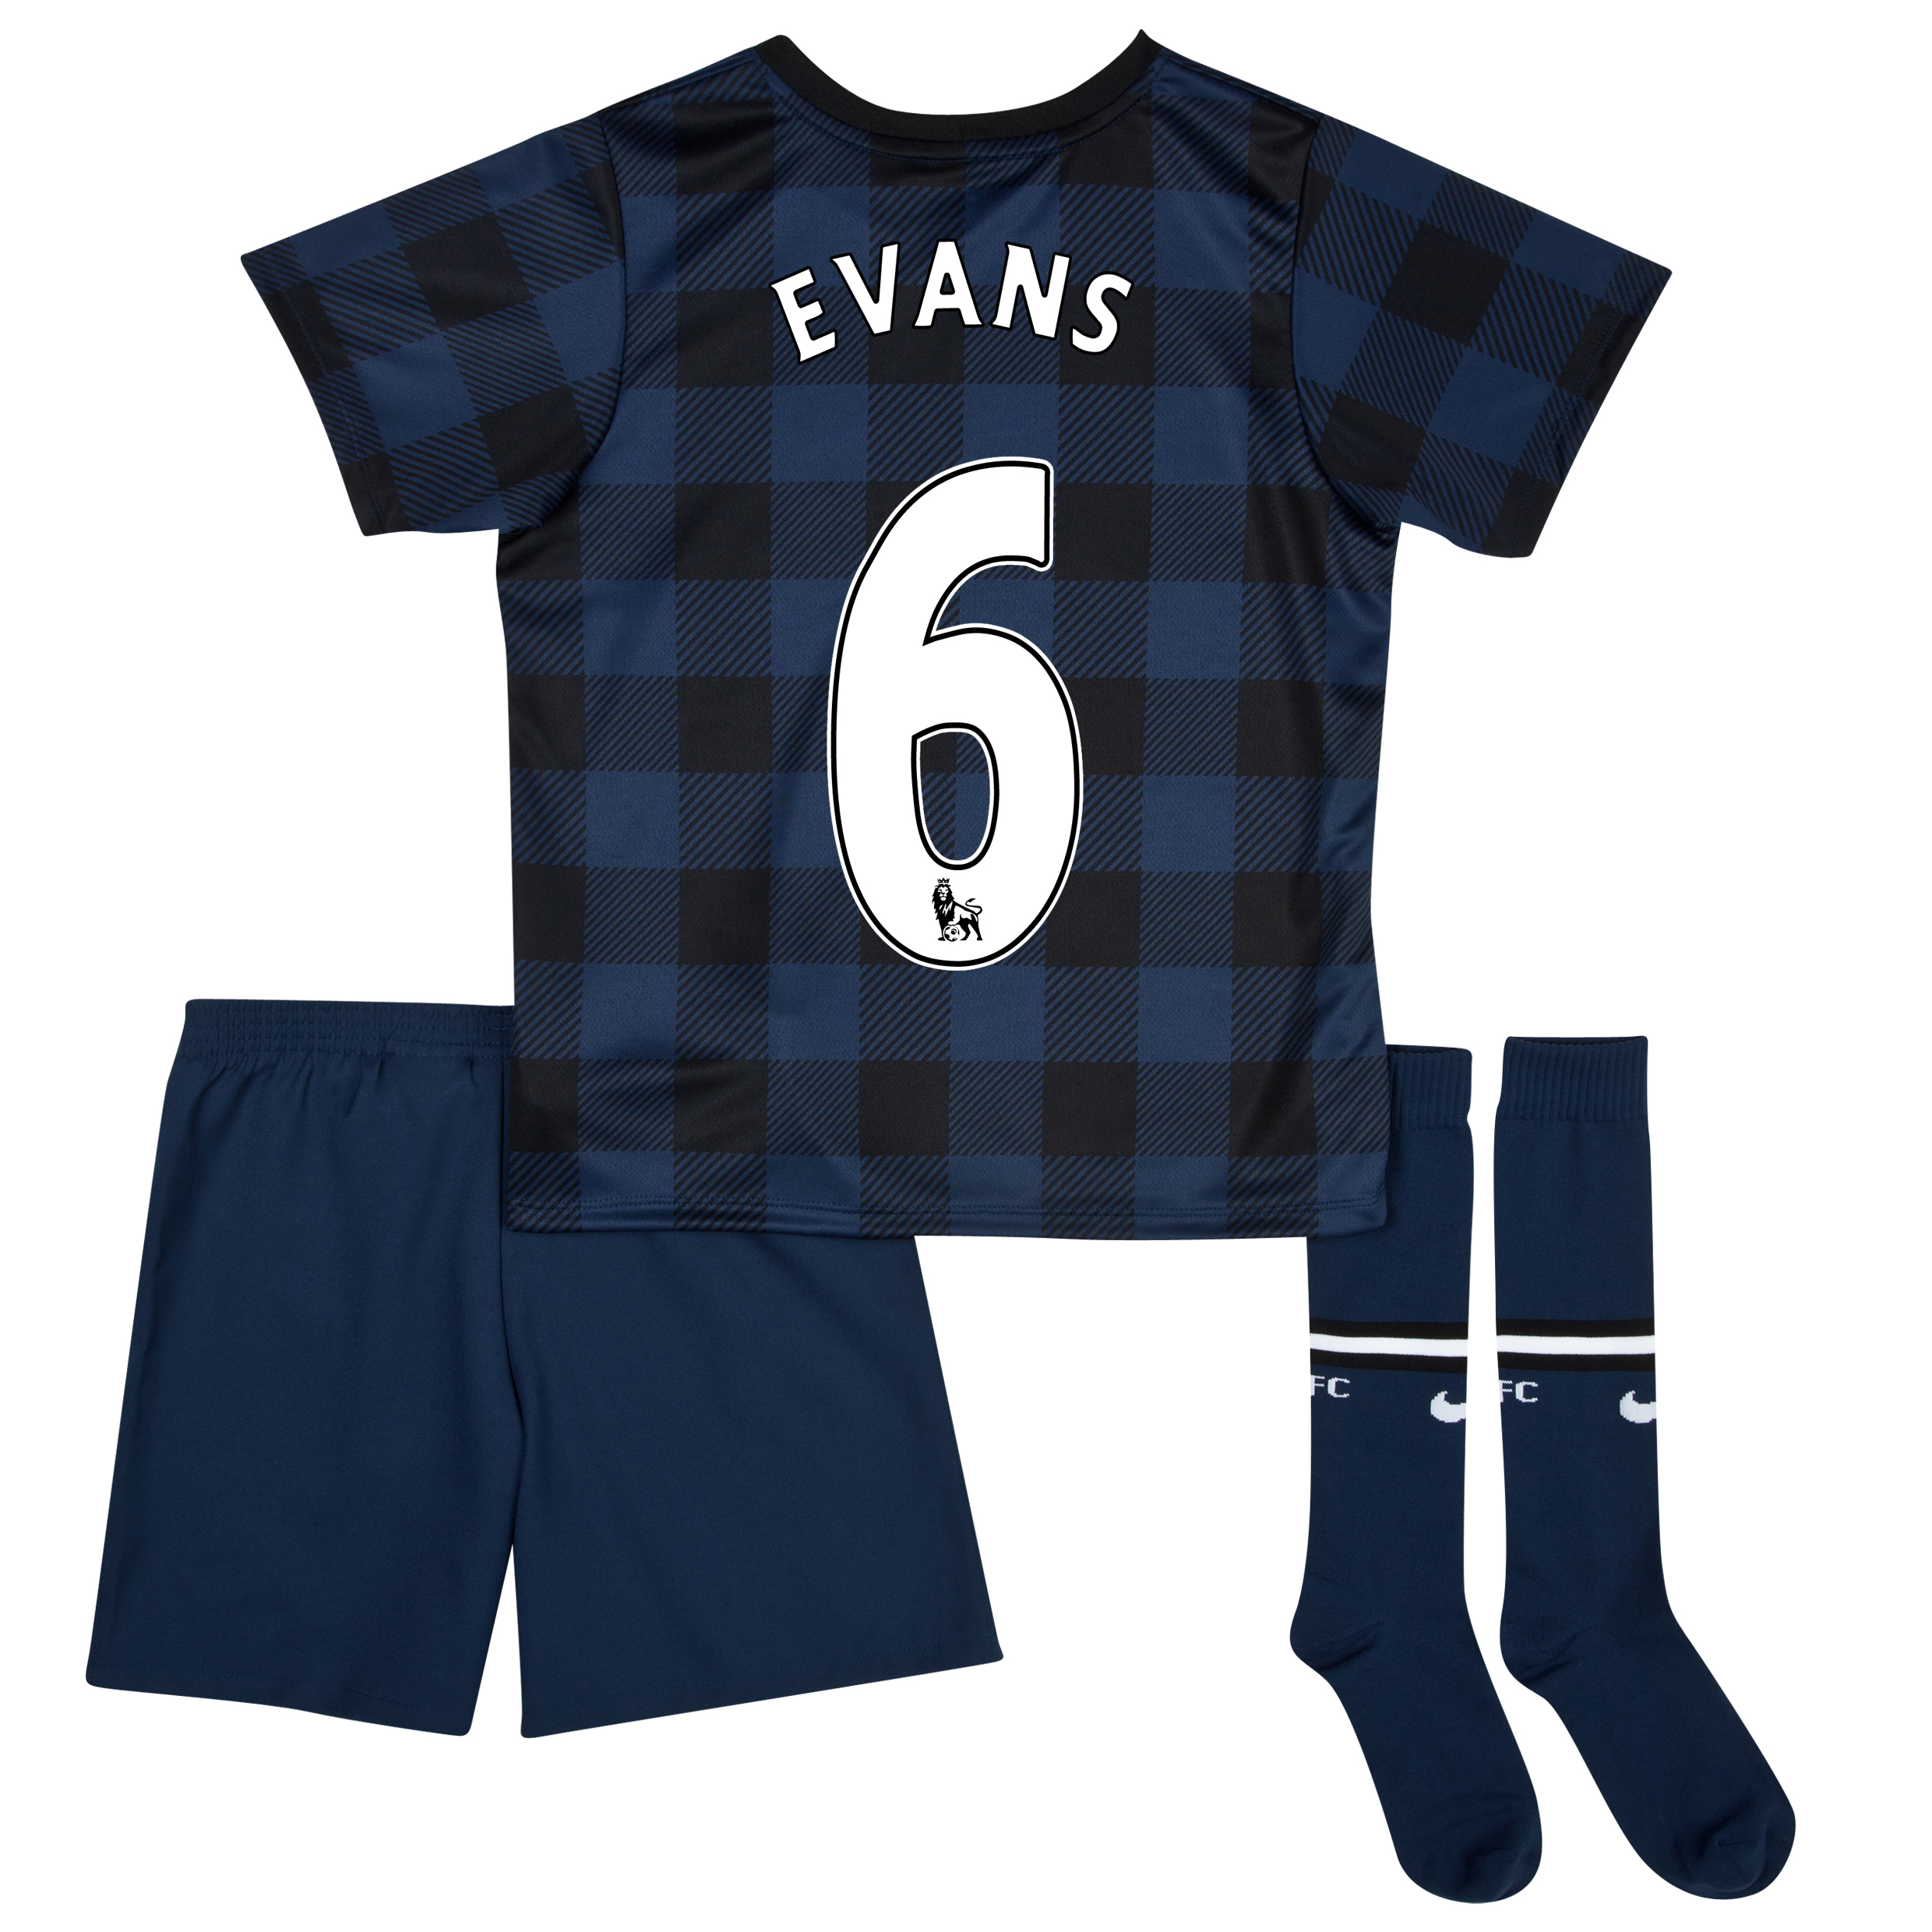 Manchester United Away Kit 2013/14 - Little Boys with Evans 6 printing